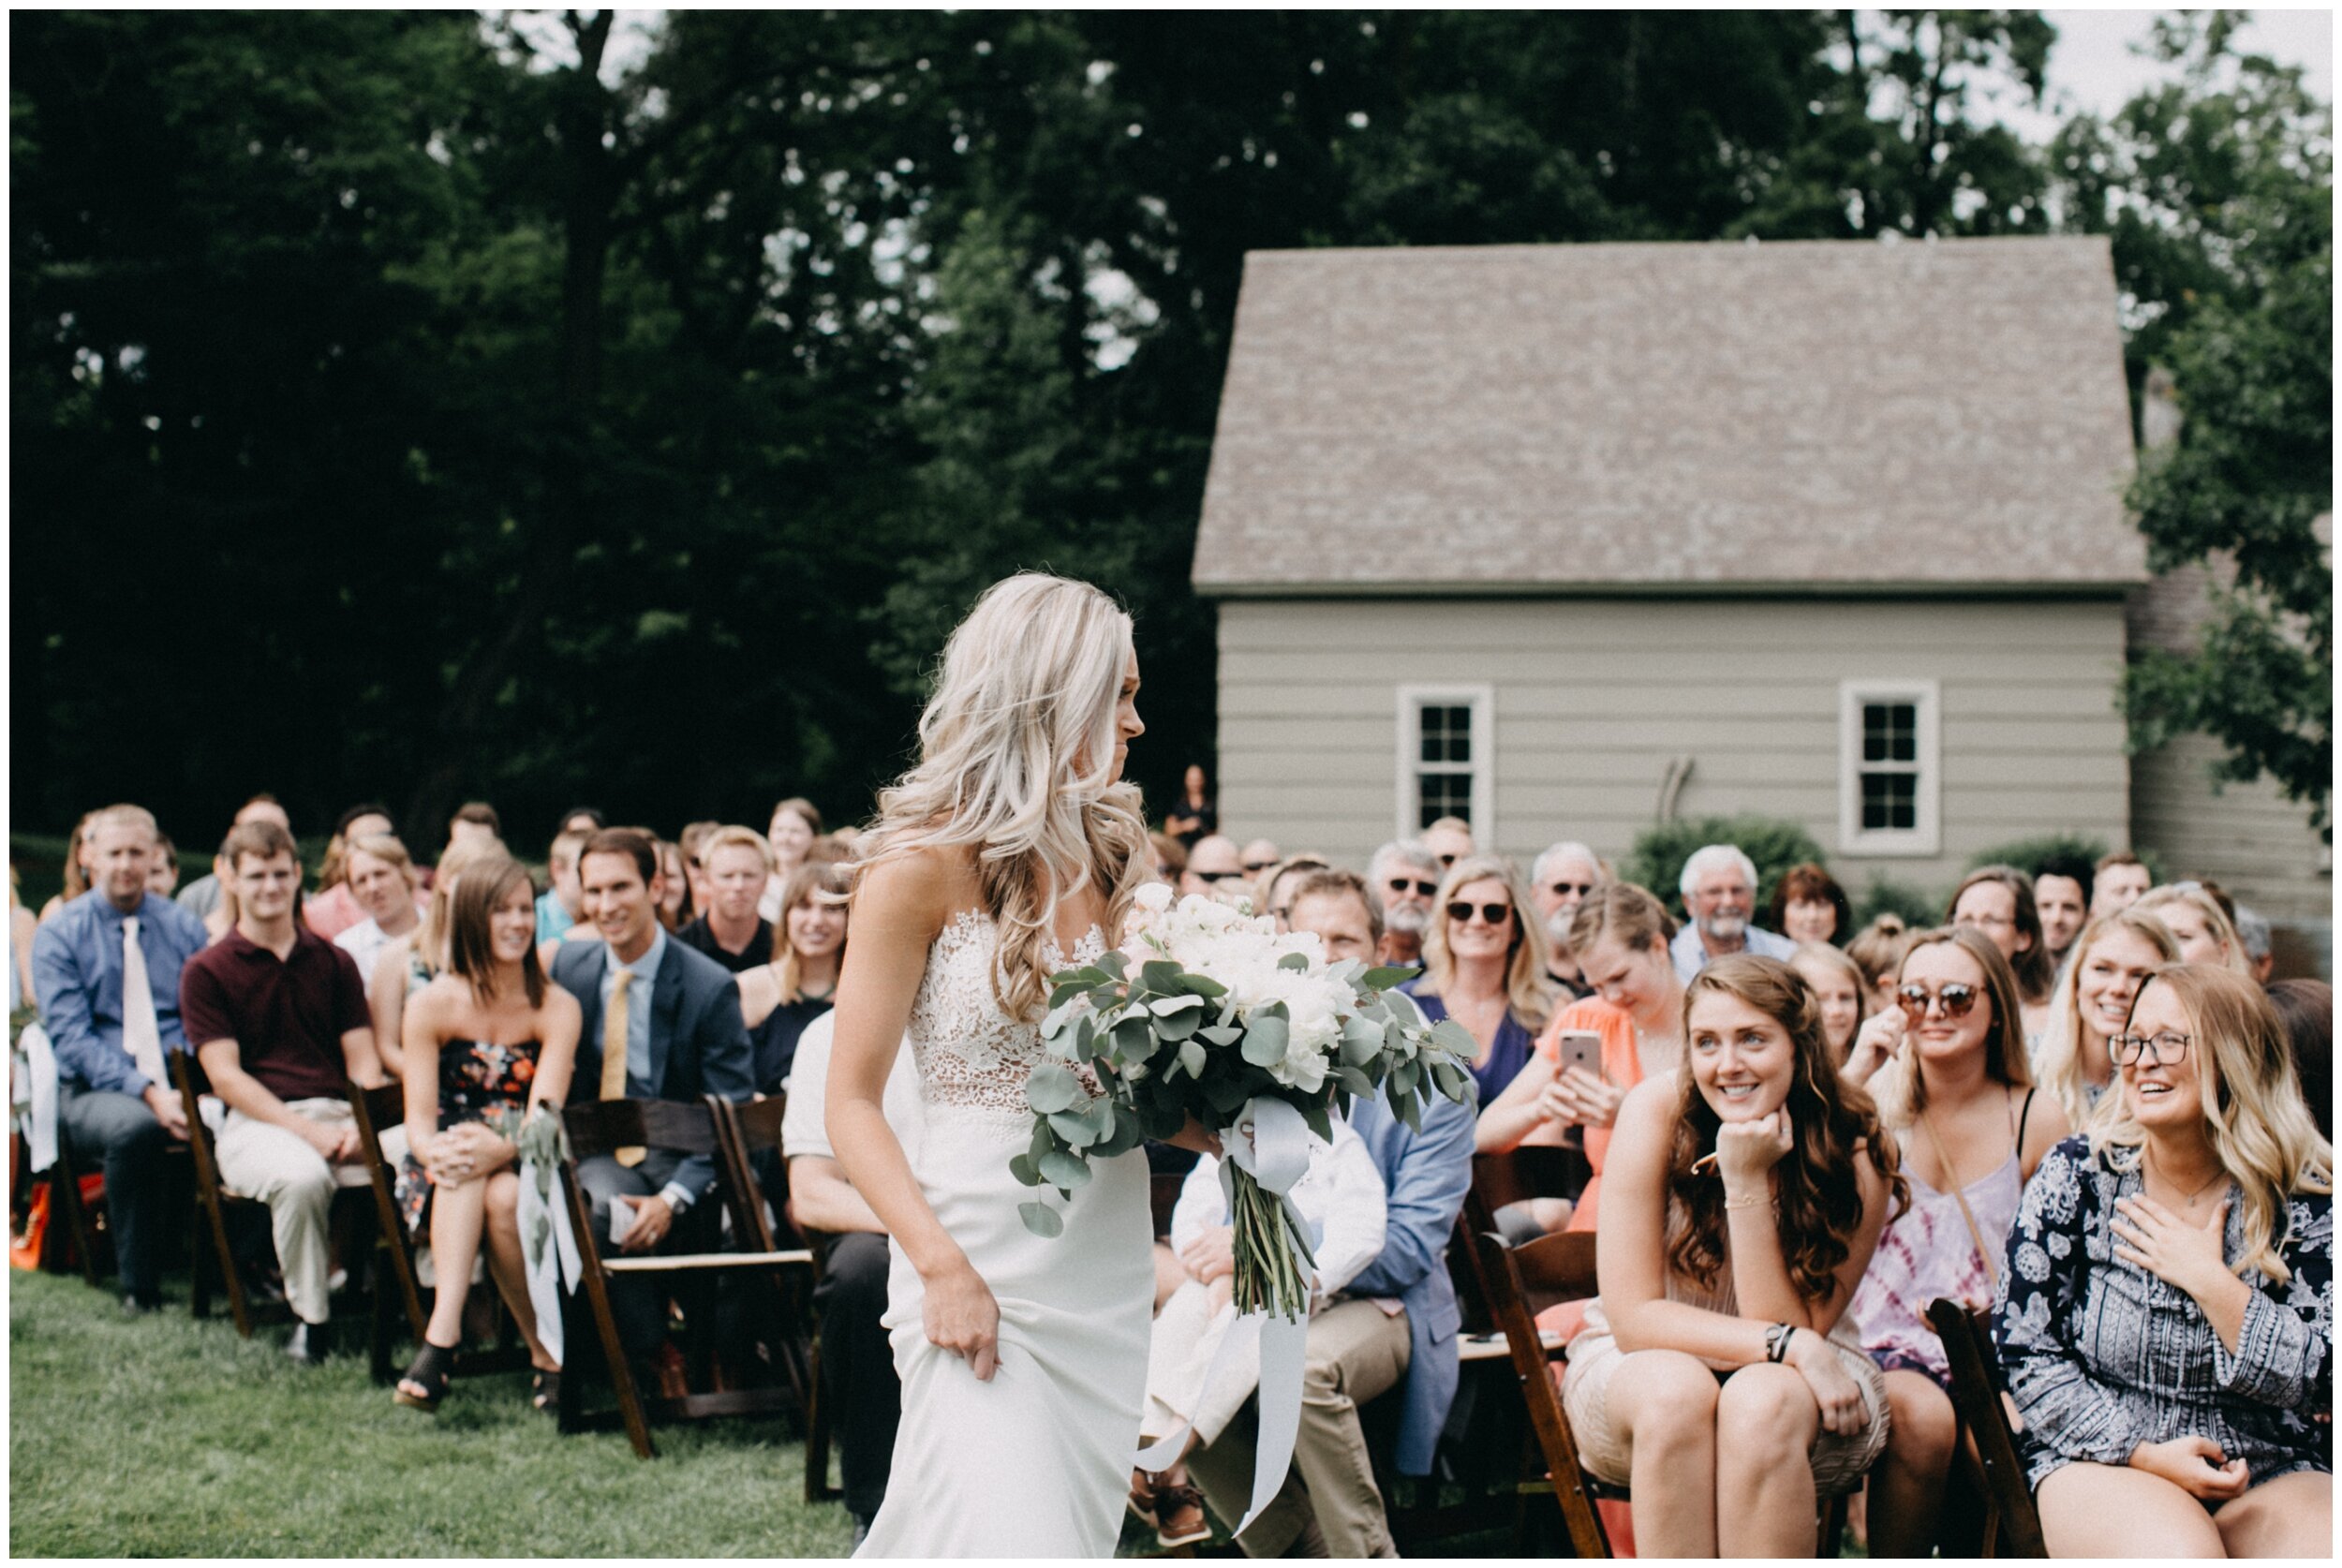 Bride walking down aisle during outdoor wedding ceremony at Creekside Farm in Rush City, Minnesota